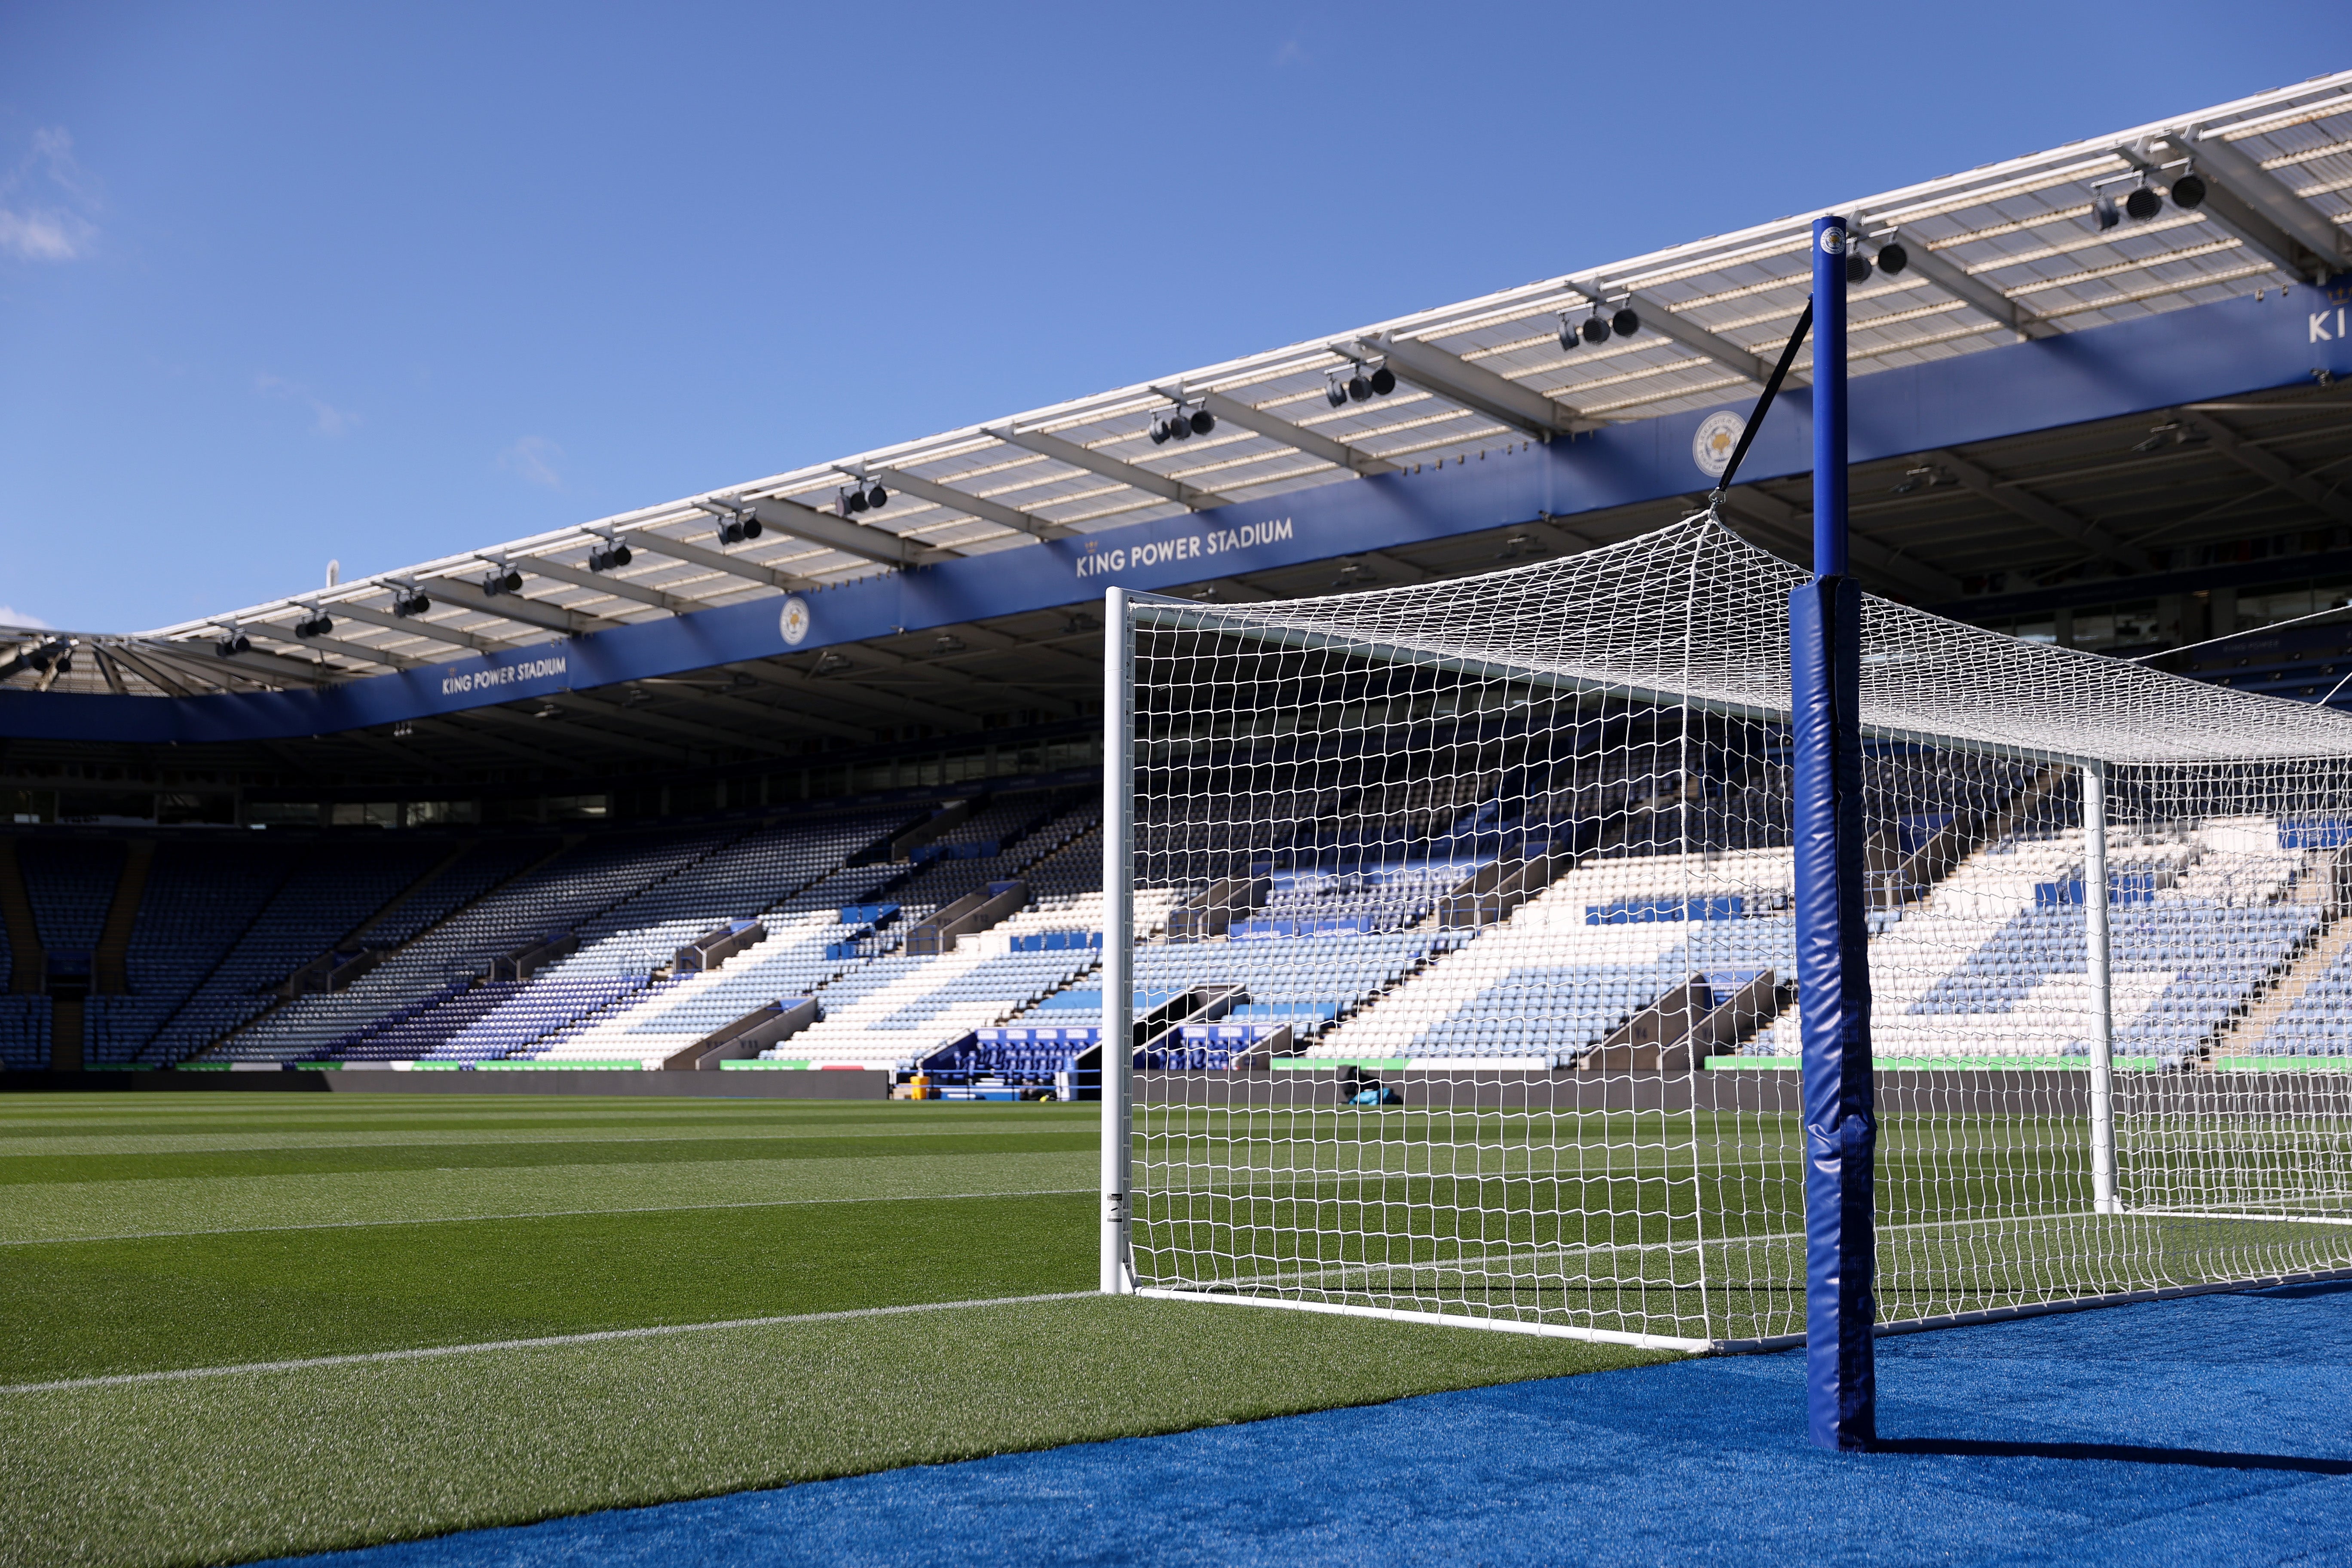 A general view of King Power Stadium